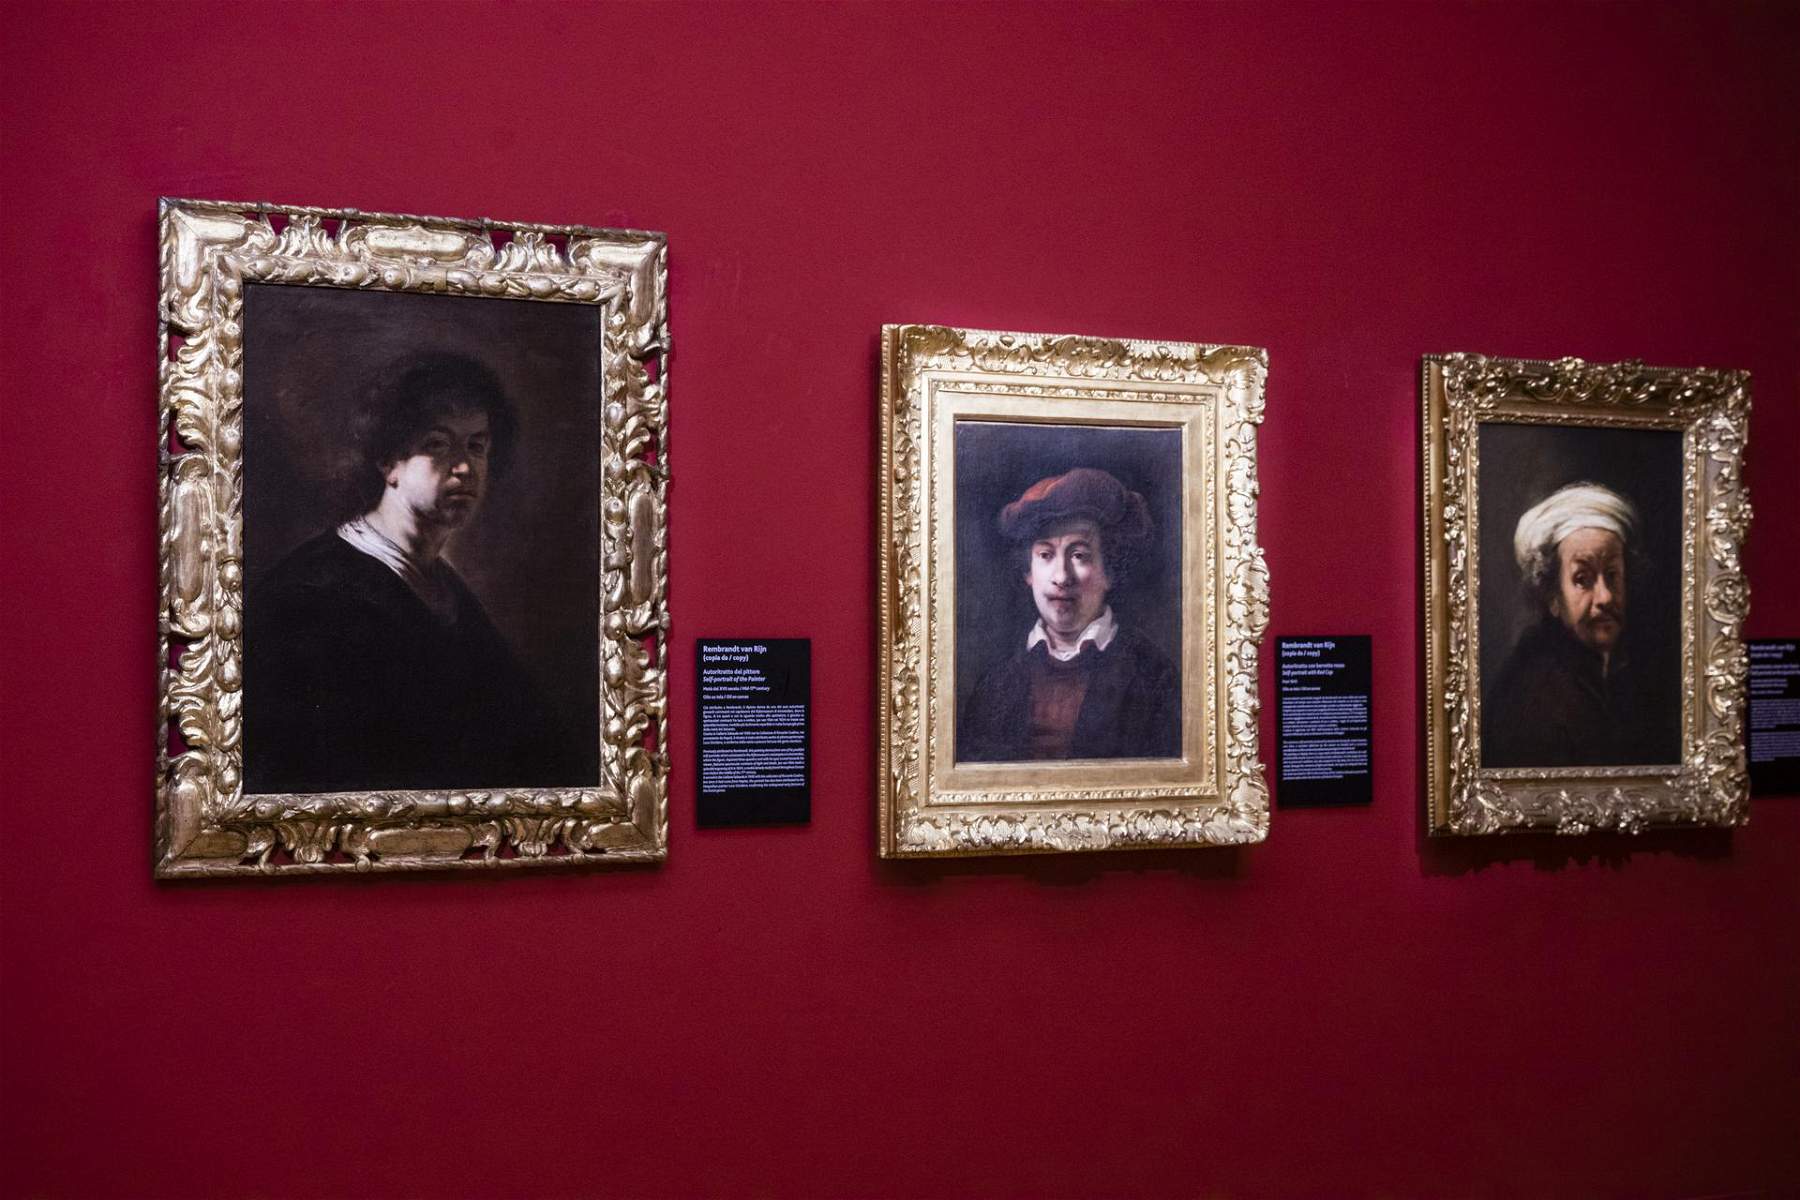 Turin, at the Royal Museums an exhibition dedicated to Rembrandt with some 20 works